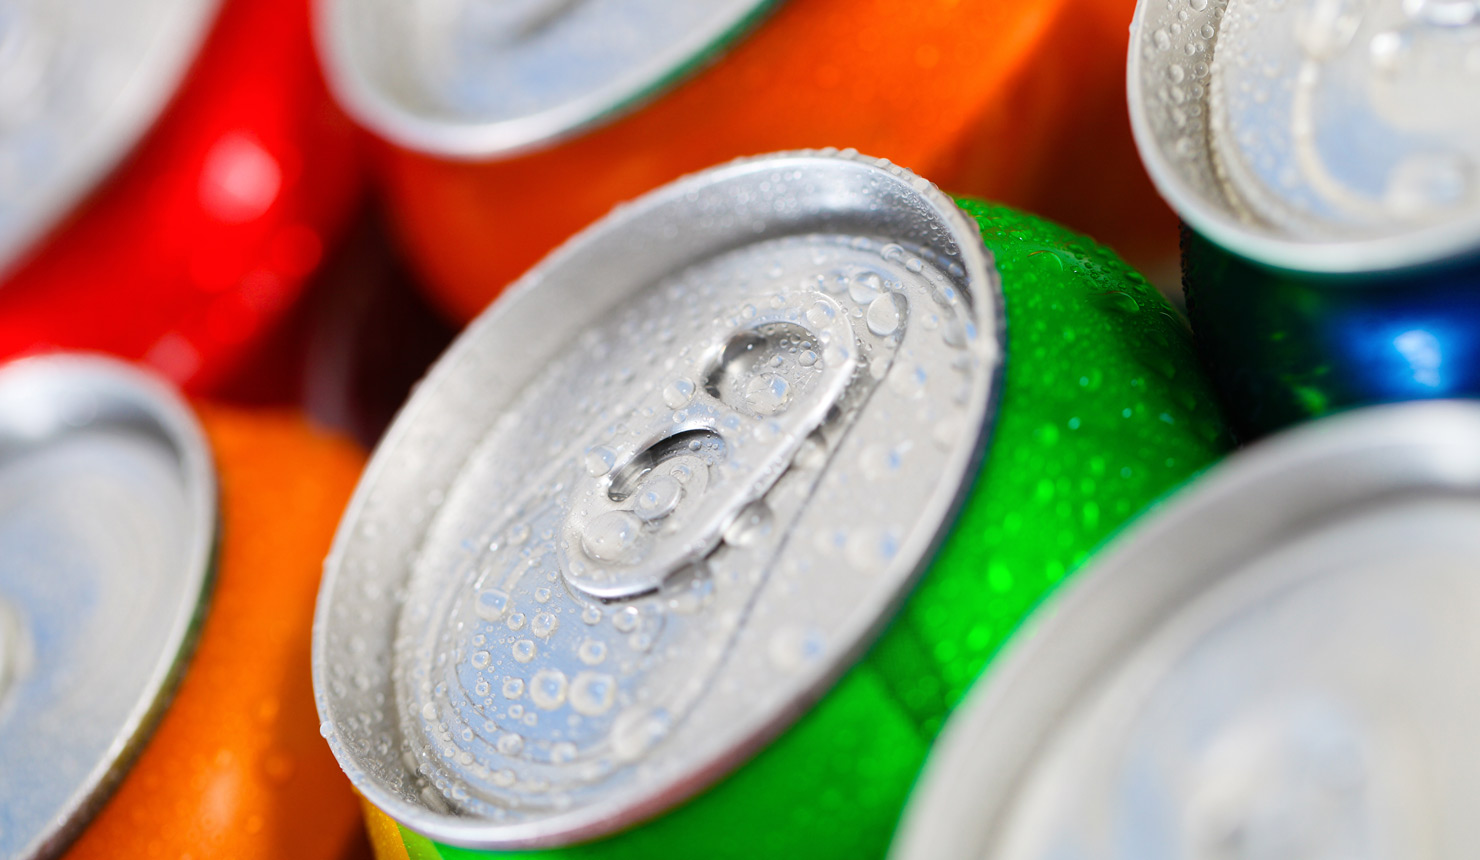 Mixing Energy Drinks, Alcohol Tied to Abusive Drinking in Teens